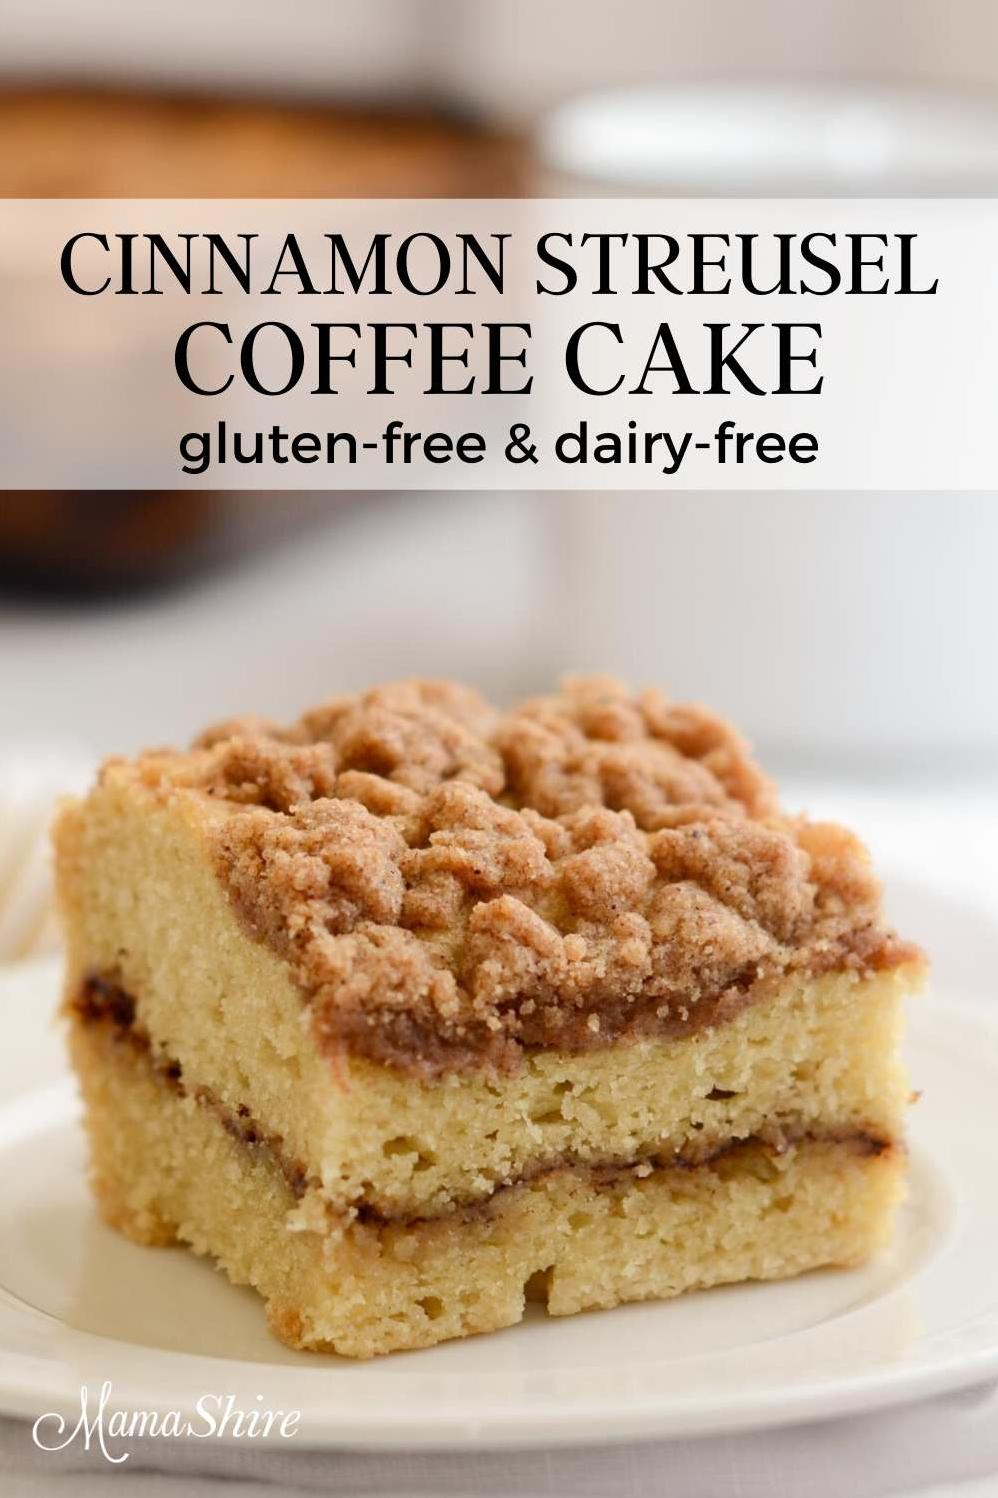  Pour a cup of your favorite coffee and enjoy a slice of our delicious homemade cinnamon streusel cake.